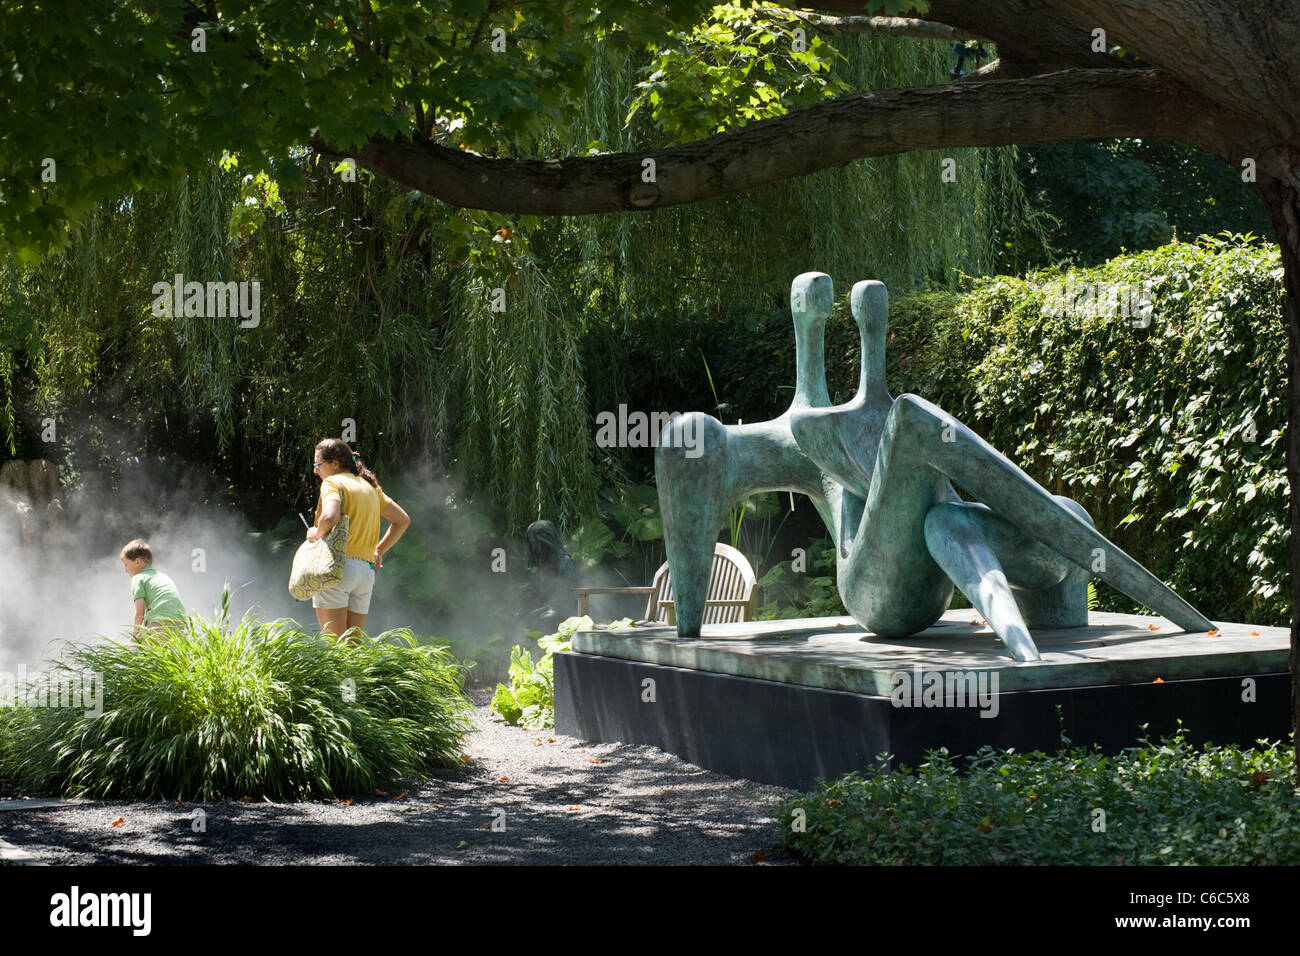 Grounds for Sculpture, Trenton, New Jersey Stock Photo